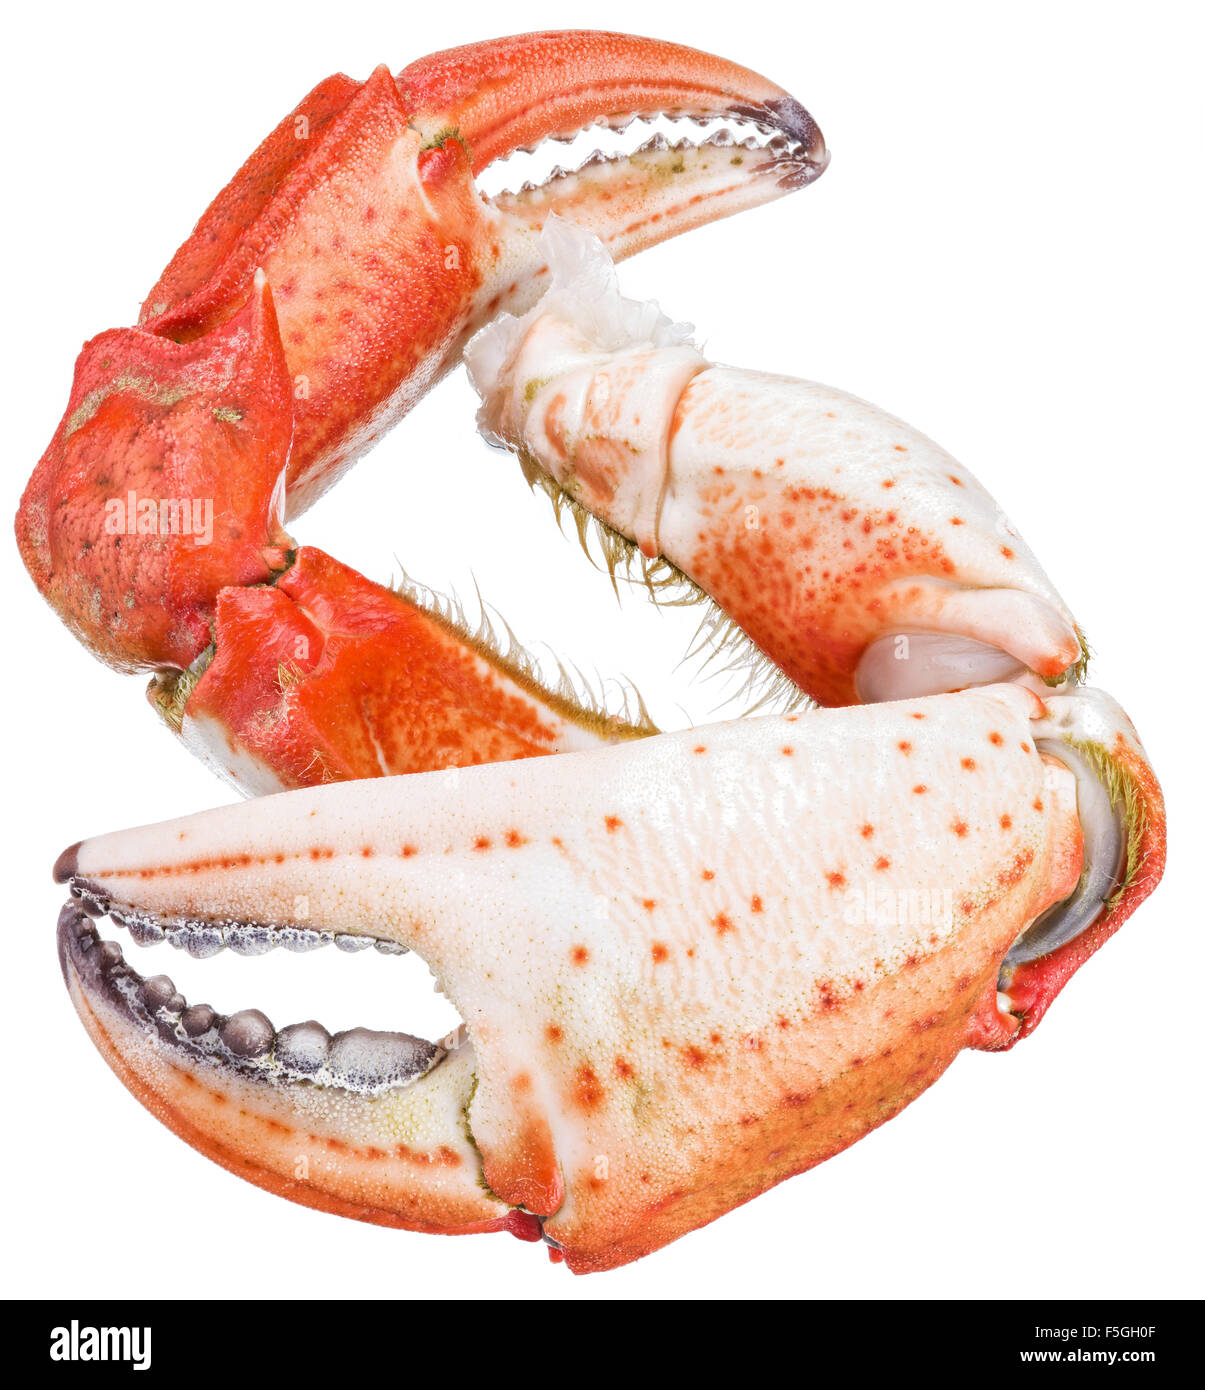 Cooked crab claws. File contains clipping paths. Stock Photo